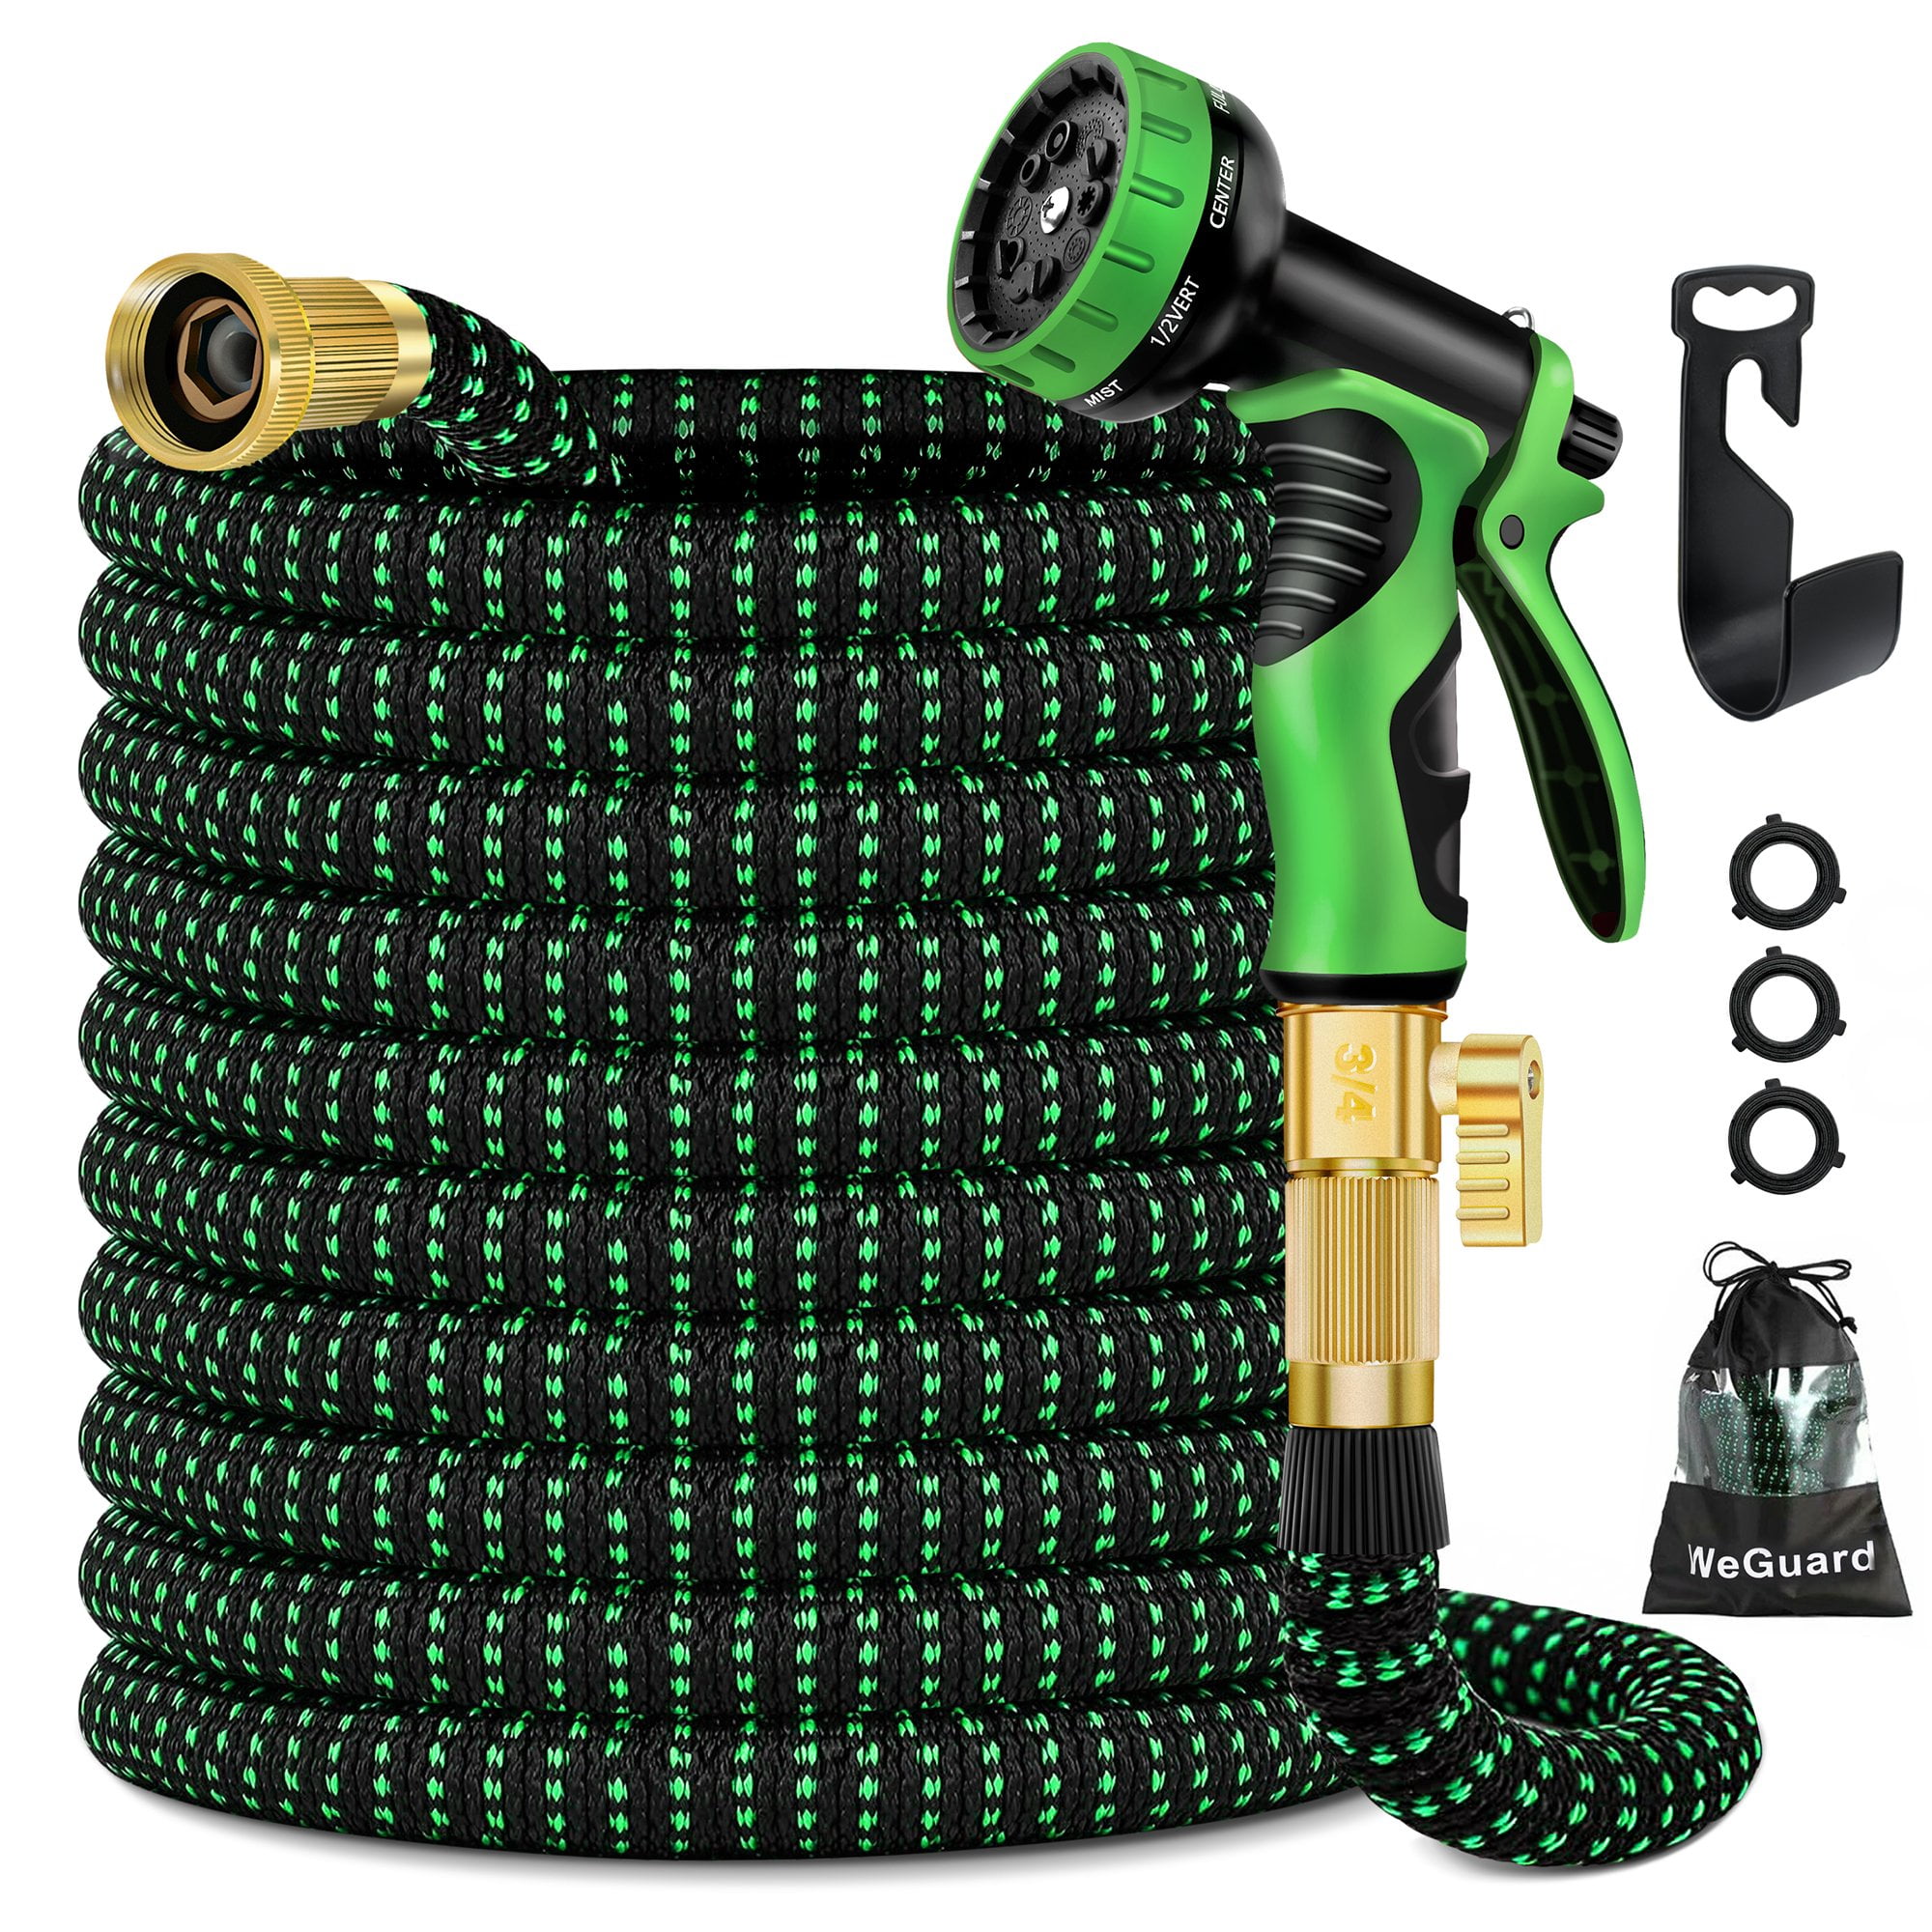 Gpeng 75ft Hose Garden Hose Durable Expanding Collapsible Flexible Pocket Hose Water Hose 3/4 Solid Brass Connector with 9 Function Spray Nozzle Upgraded Expandable Hose with Three Latex Core